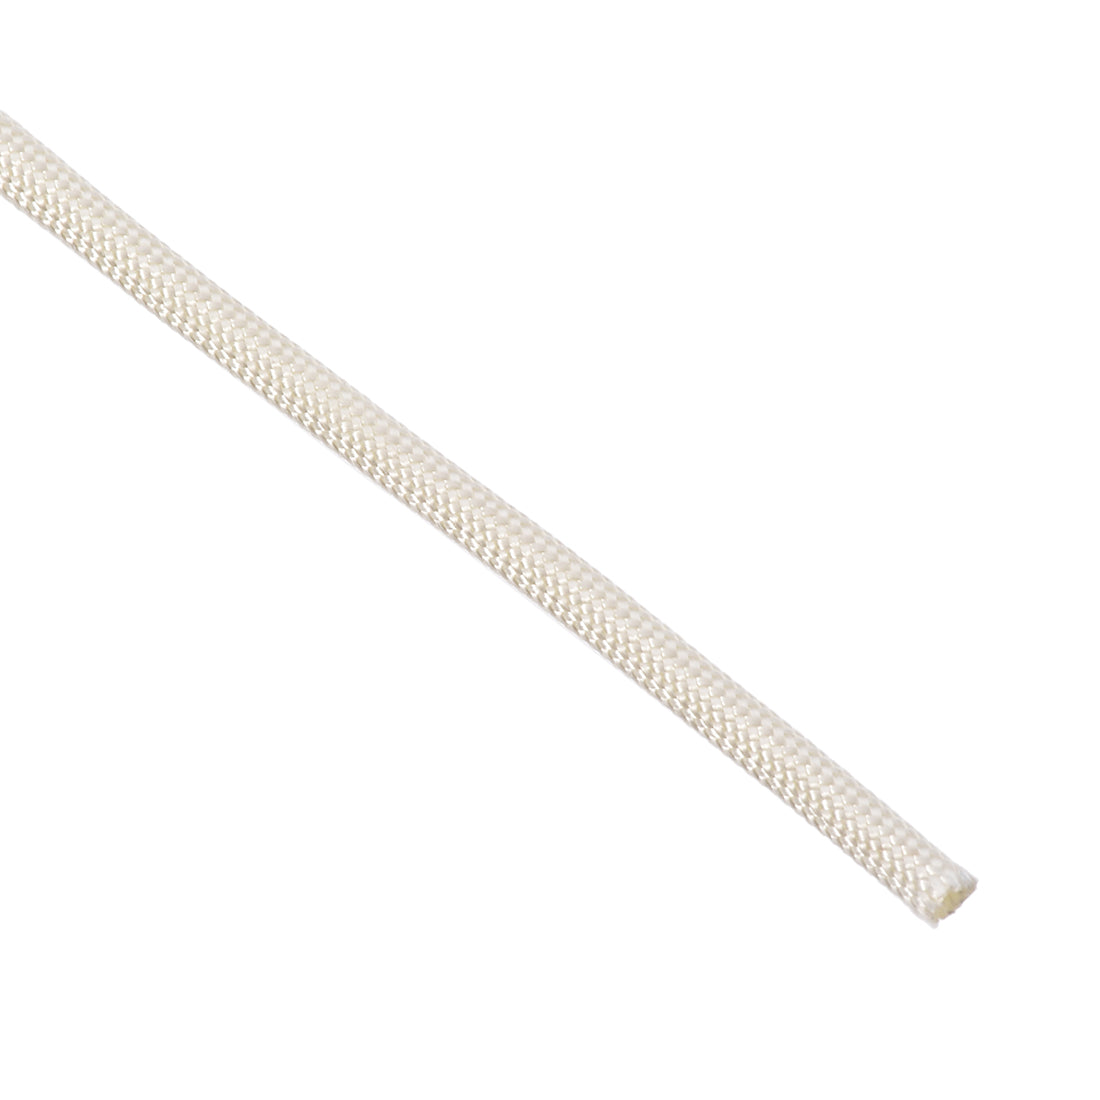 uxcell Uxcell Insulation Cable Protector, 16.4Ft-2.5mm High TEMP Fiberglass Sleeve White